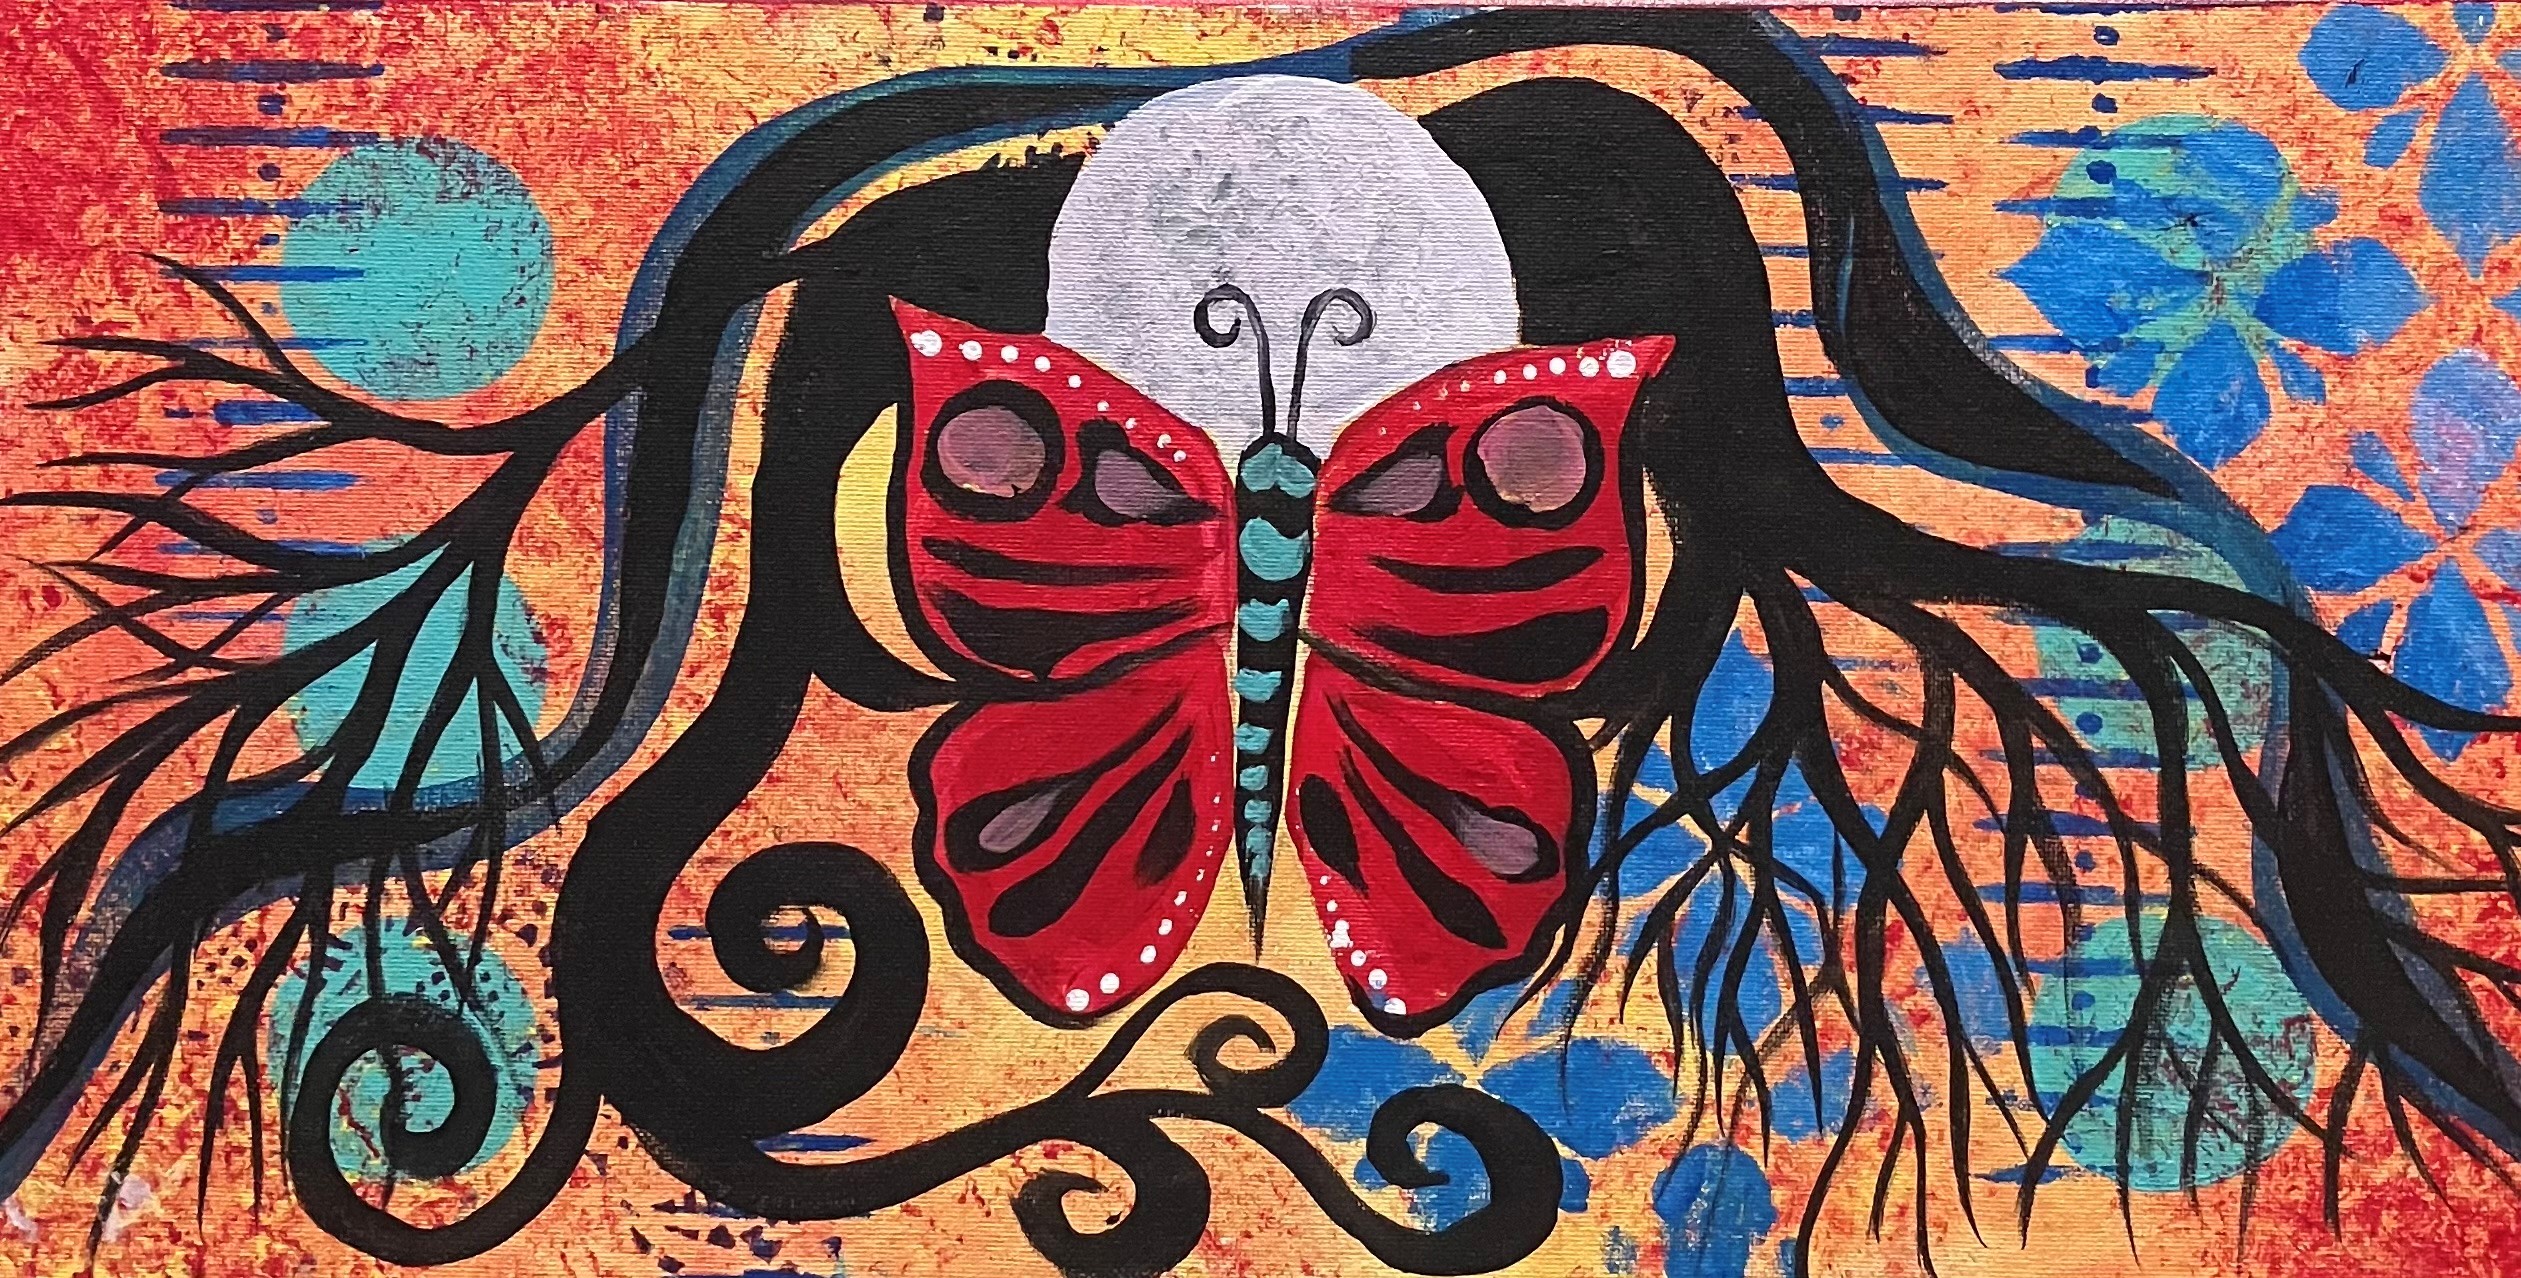 Sample 6 of a colourful painting created with stencils and other random items, with a butterfly image.